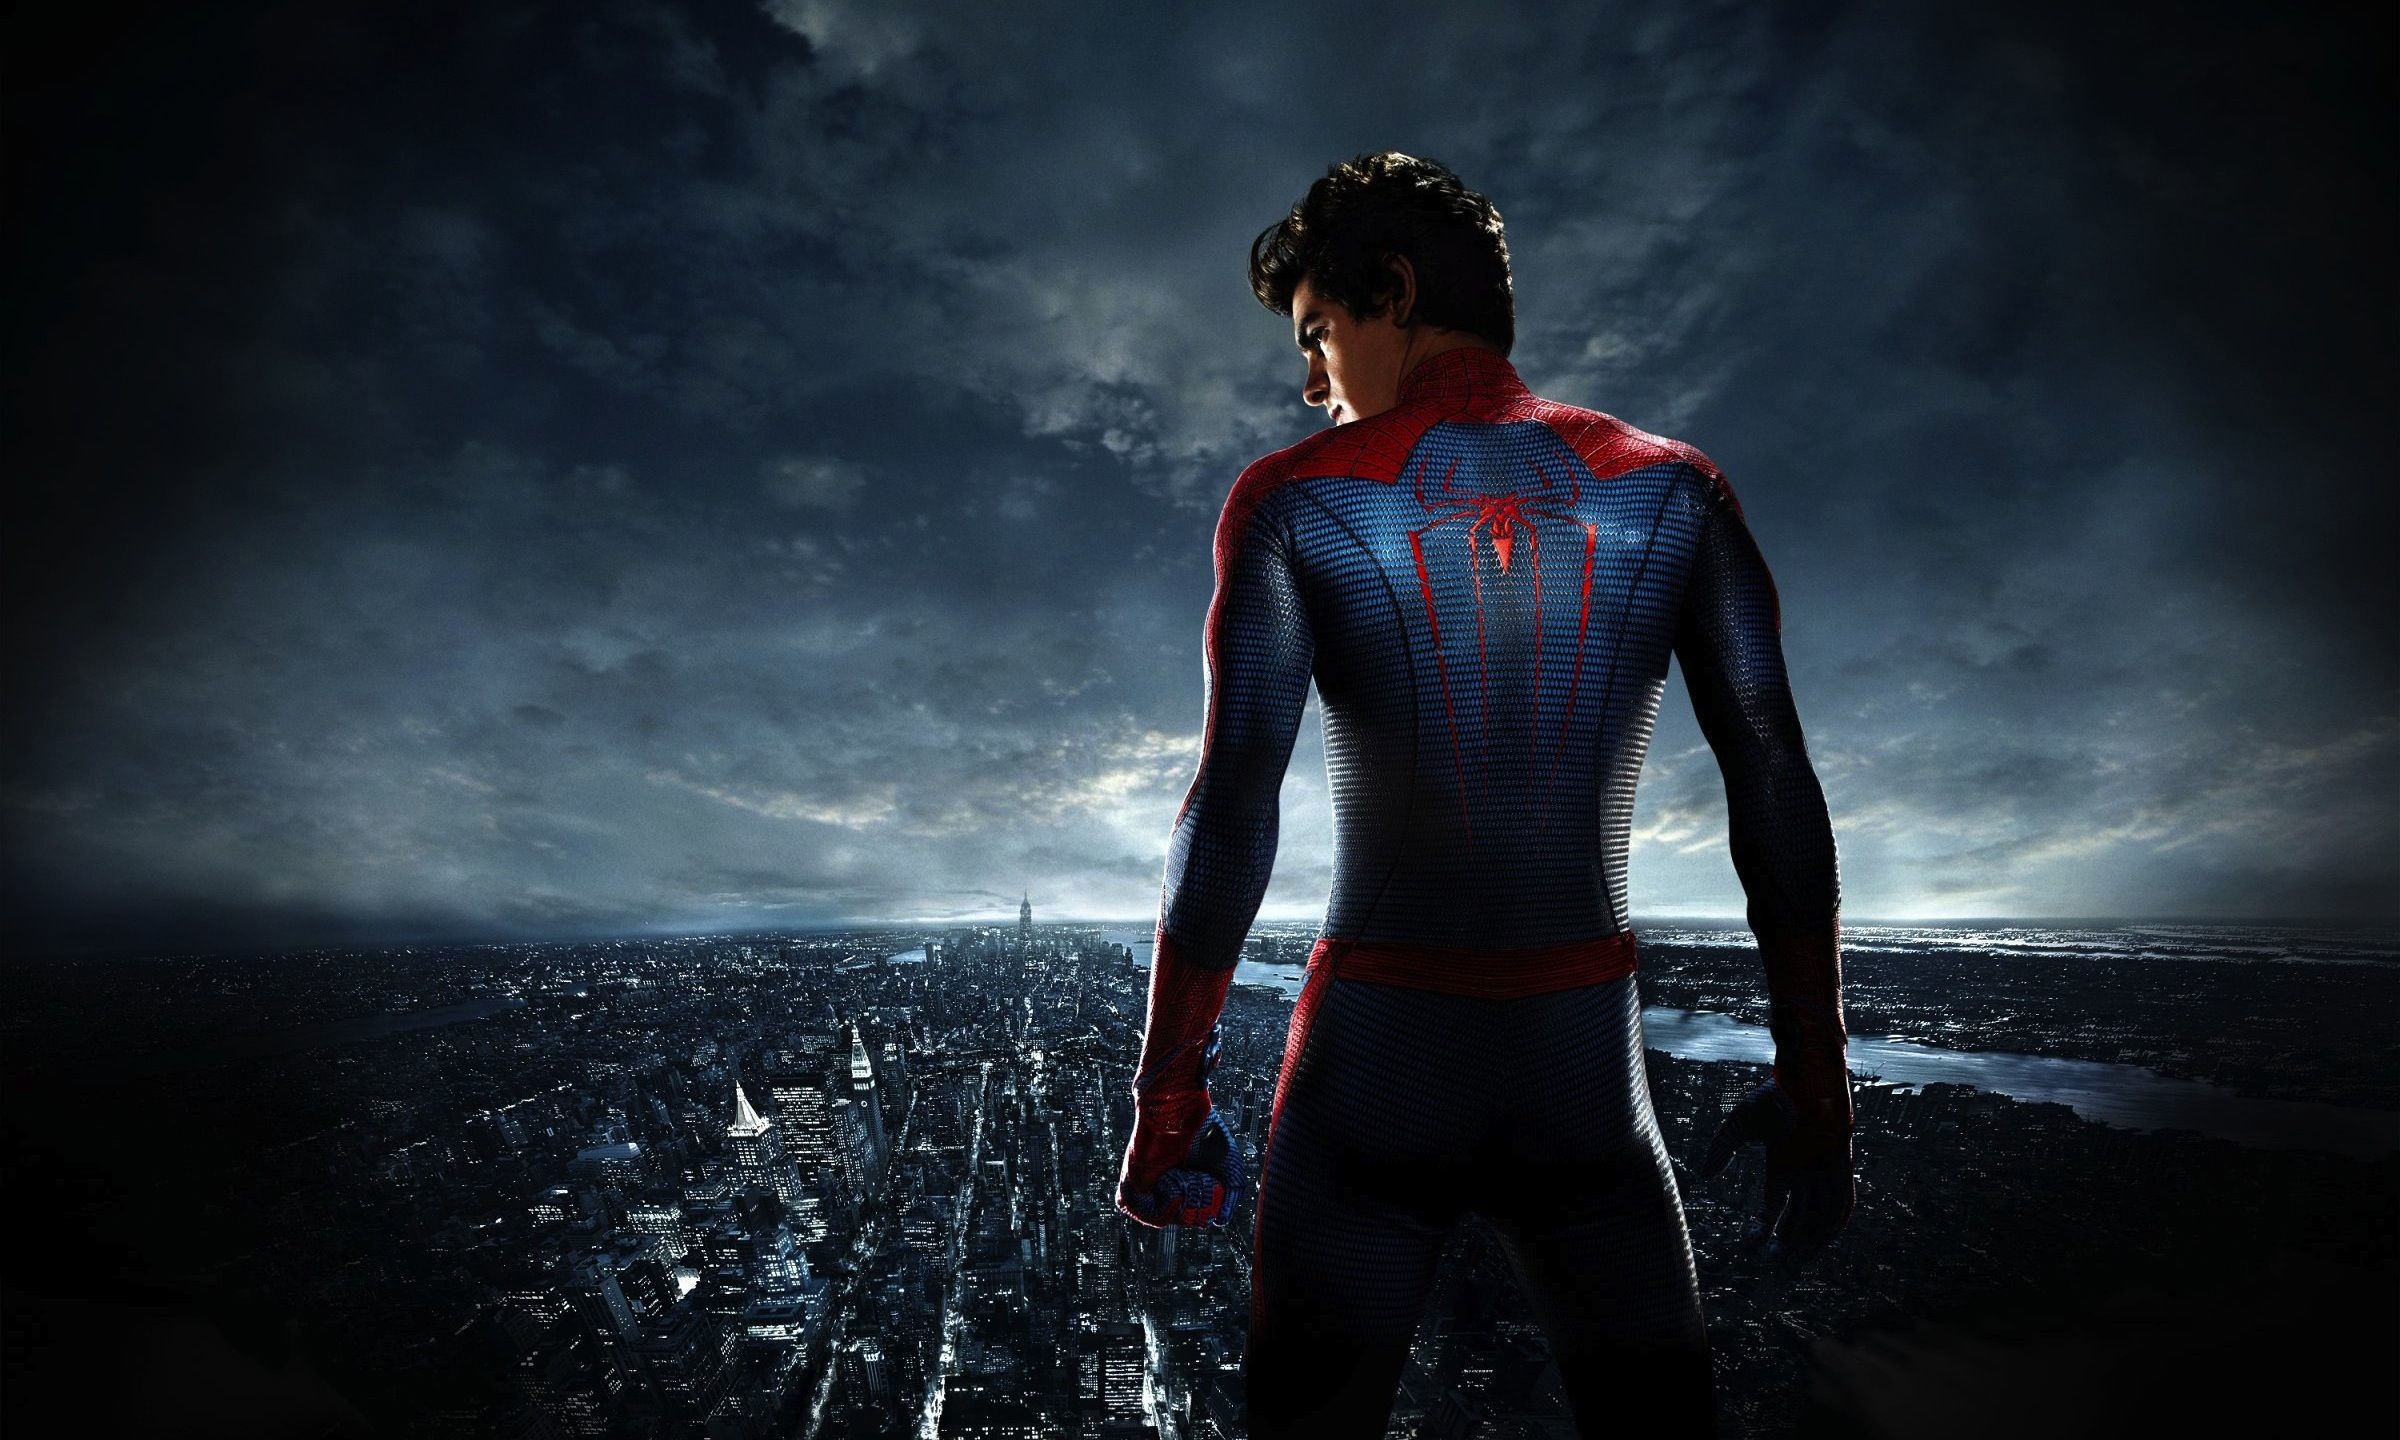 2400x1440 Awesome Spiderman Computer Wallpapers, Desktop Backgrounds .